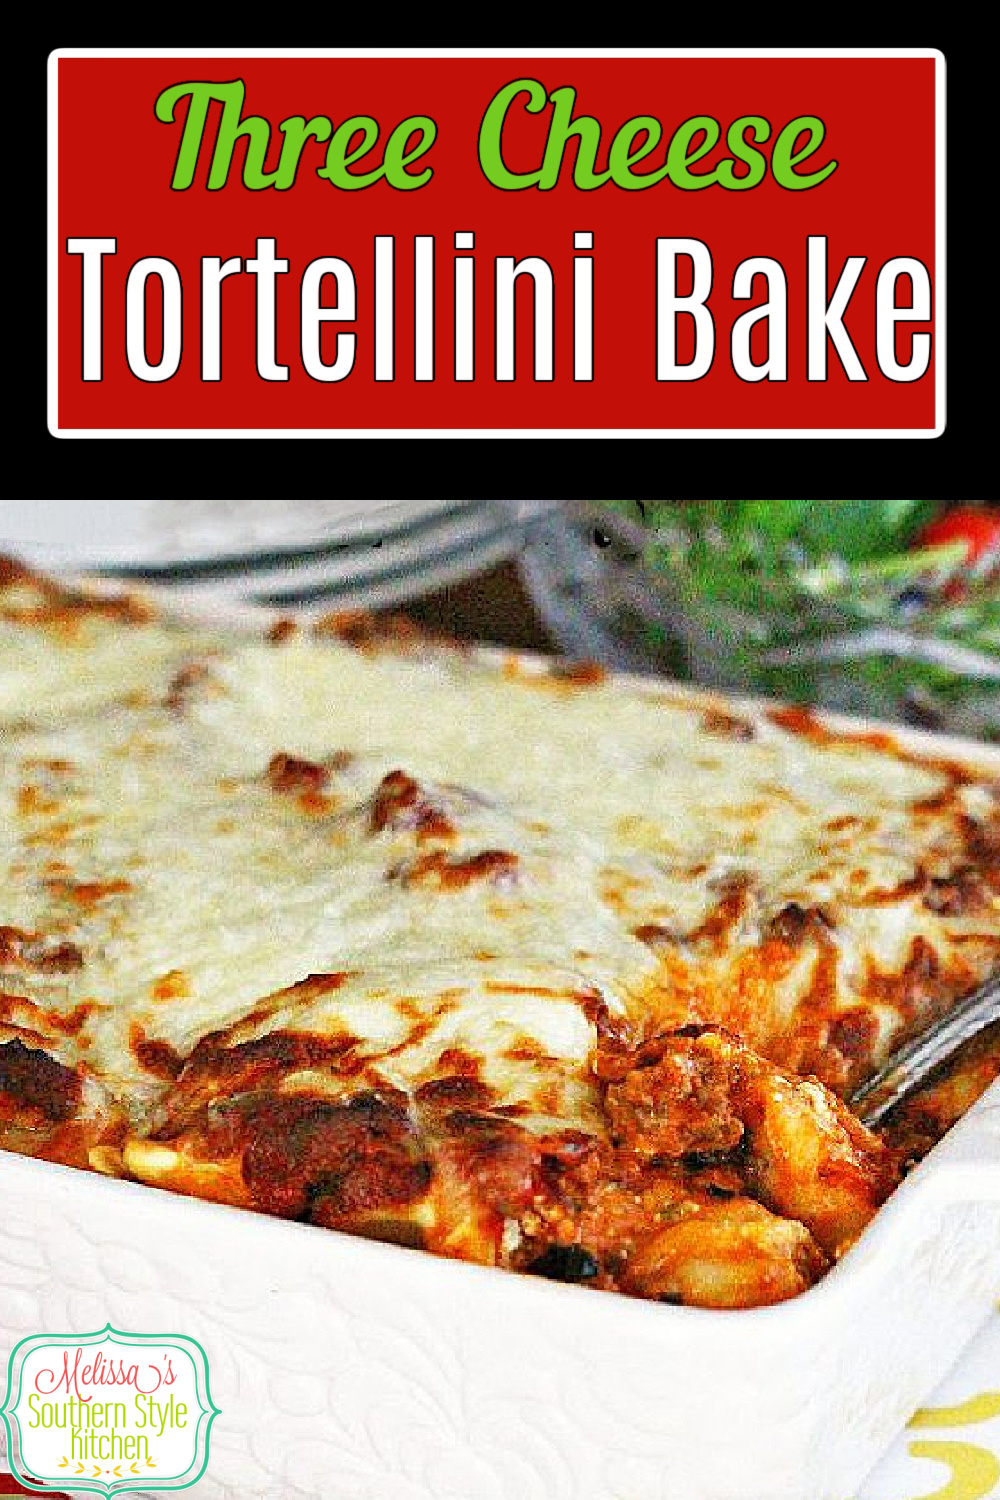 Turn refrigerated tortellini into this Three Cheese Tortellini Bake that's sure to turn your meal into an Italian inspired weekday feast #cheesetortellini #pastacasseroles #threecheesetortellinibake #italianfood #casseroles #pasta #dinner #easyrecipes via @melissasssk